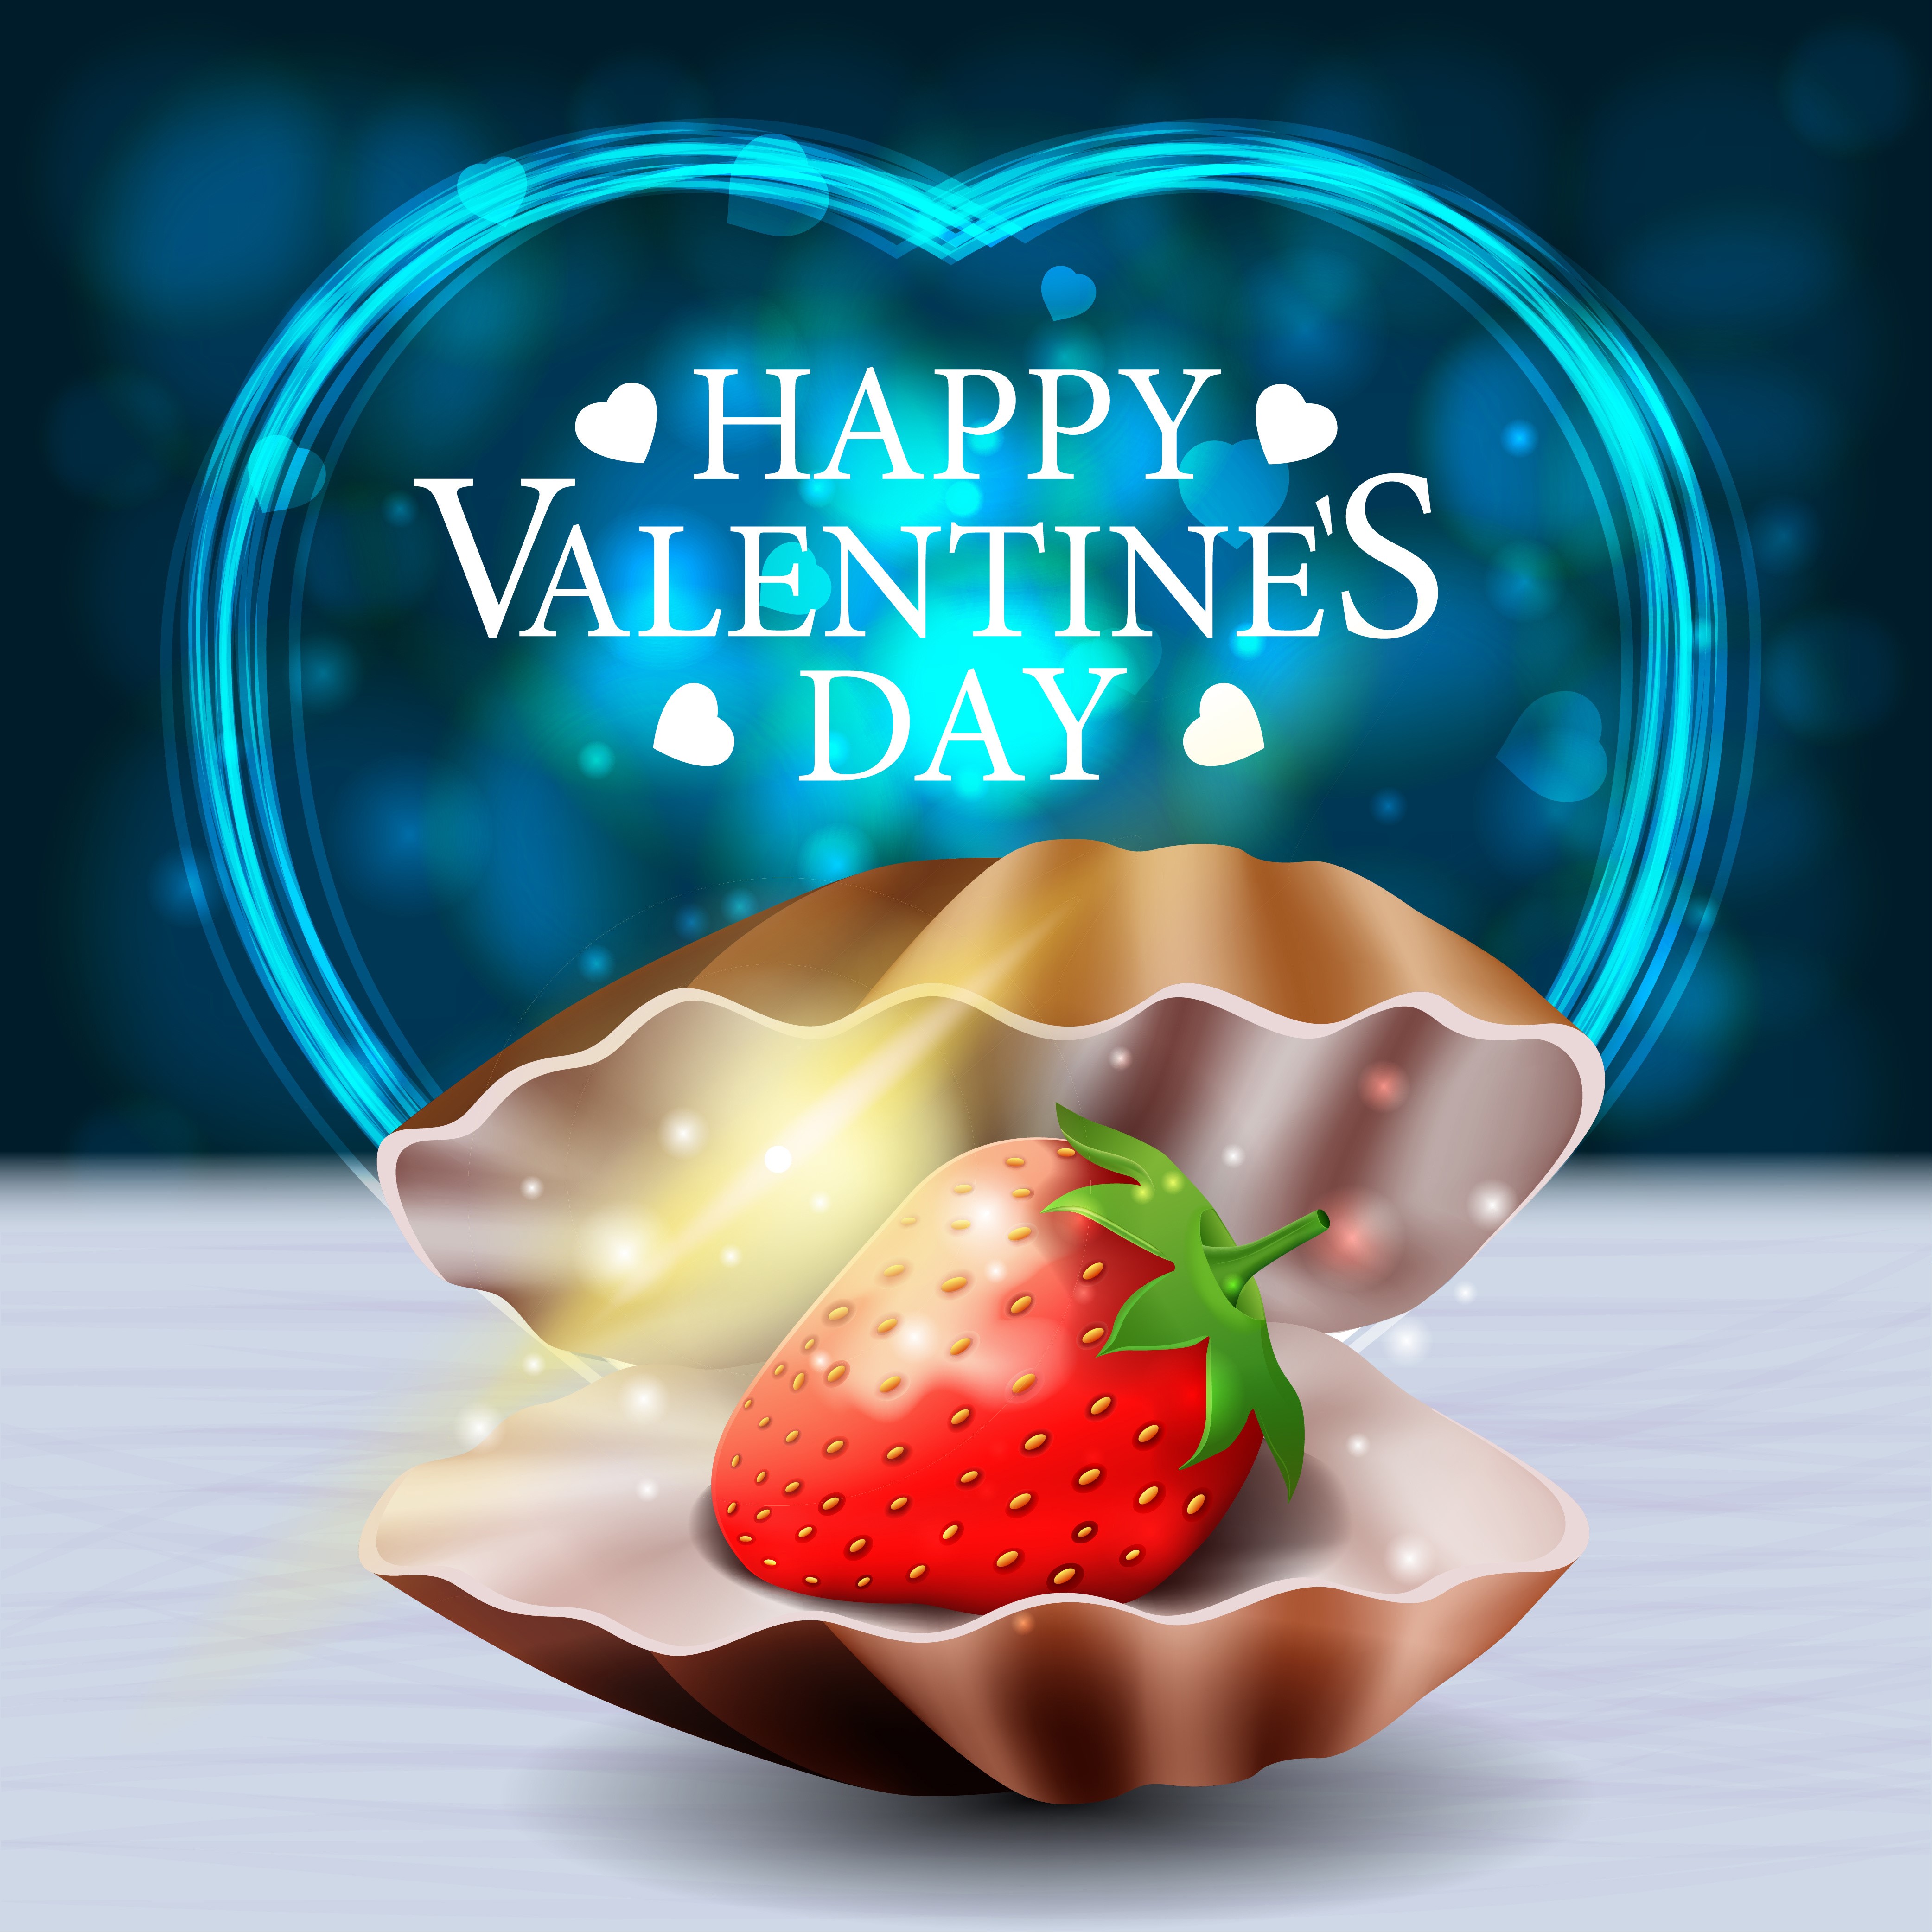 4K, Vector Graphics, Valentine's Day, Shells, Strawberry, English, Word, Heart Gallery HD Wallpaper